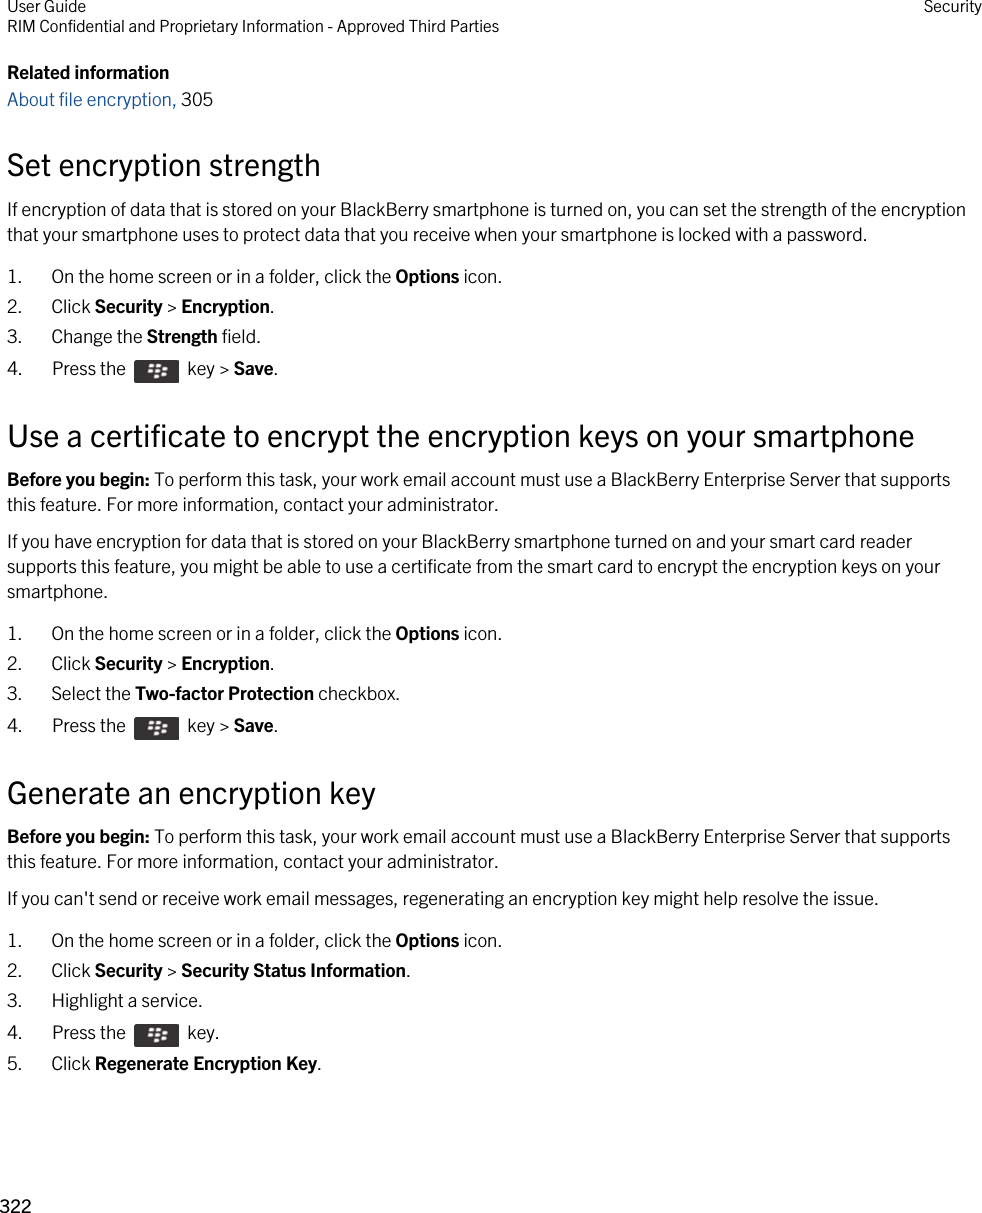 Related informationAbout file encryption, 305 Set encryption strengthIf encryption of data that is stored on your BlackBerry smartphone is turned on, you can set the strength of the encryption that your smartphone uses to protect data that you receive when your smartphone is locked with a password.1. On the home screen or in a folder, click the Options icon.2. Click Security &gt; Encryption.3. Change the Strength field.4.  Press the    key &gt; Save. Use a certificate to encrypt the encryption keys on your smartphoneBefore you begin: To perform this task, your work email account must use a BlackBerry Enterprise Server that supports this feature. For more information, contact your administrator.If you have encryption for data that is stored on your BlackBerry smartphone turned on and your smart card reader supports this feature, you might be able to use a certificate from the smart card to encrypt the encryption keys on your smartphone.1. On the home screen or in a folder, click the Options icon.2. Click Security &gt; Encryption.3. Select the Two-factor Protection checkbox.4.  Press the    key &gt; Save. Generate an encryption keyBefore you begin: To perform this task, your work email account must use a BlackBerry Enterprise Server that supports this feature. For more information, contact your administrator.If you can&apos;t send or receive work email messages, regenerating an encryption key might help resolve the issue.1. On the home screen or in a folder, click the Options icon.2. Click Security &gt; Security Status Information.3. Highlight a service.4.  Press the    key. 5. Click Regenerate Encryption Key.User GuideRIM Confidential and Proprietary Information - Approved Third Parties Security322 